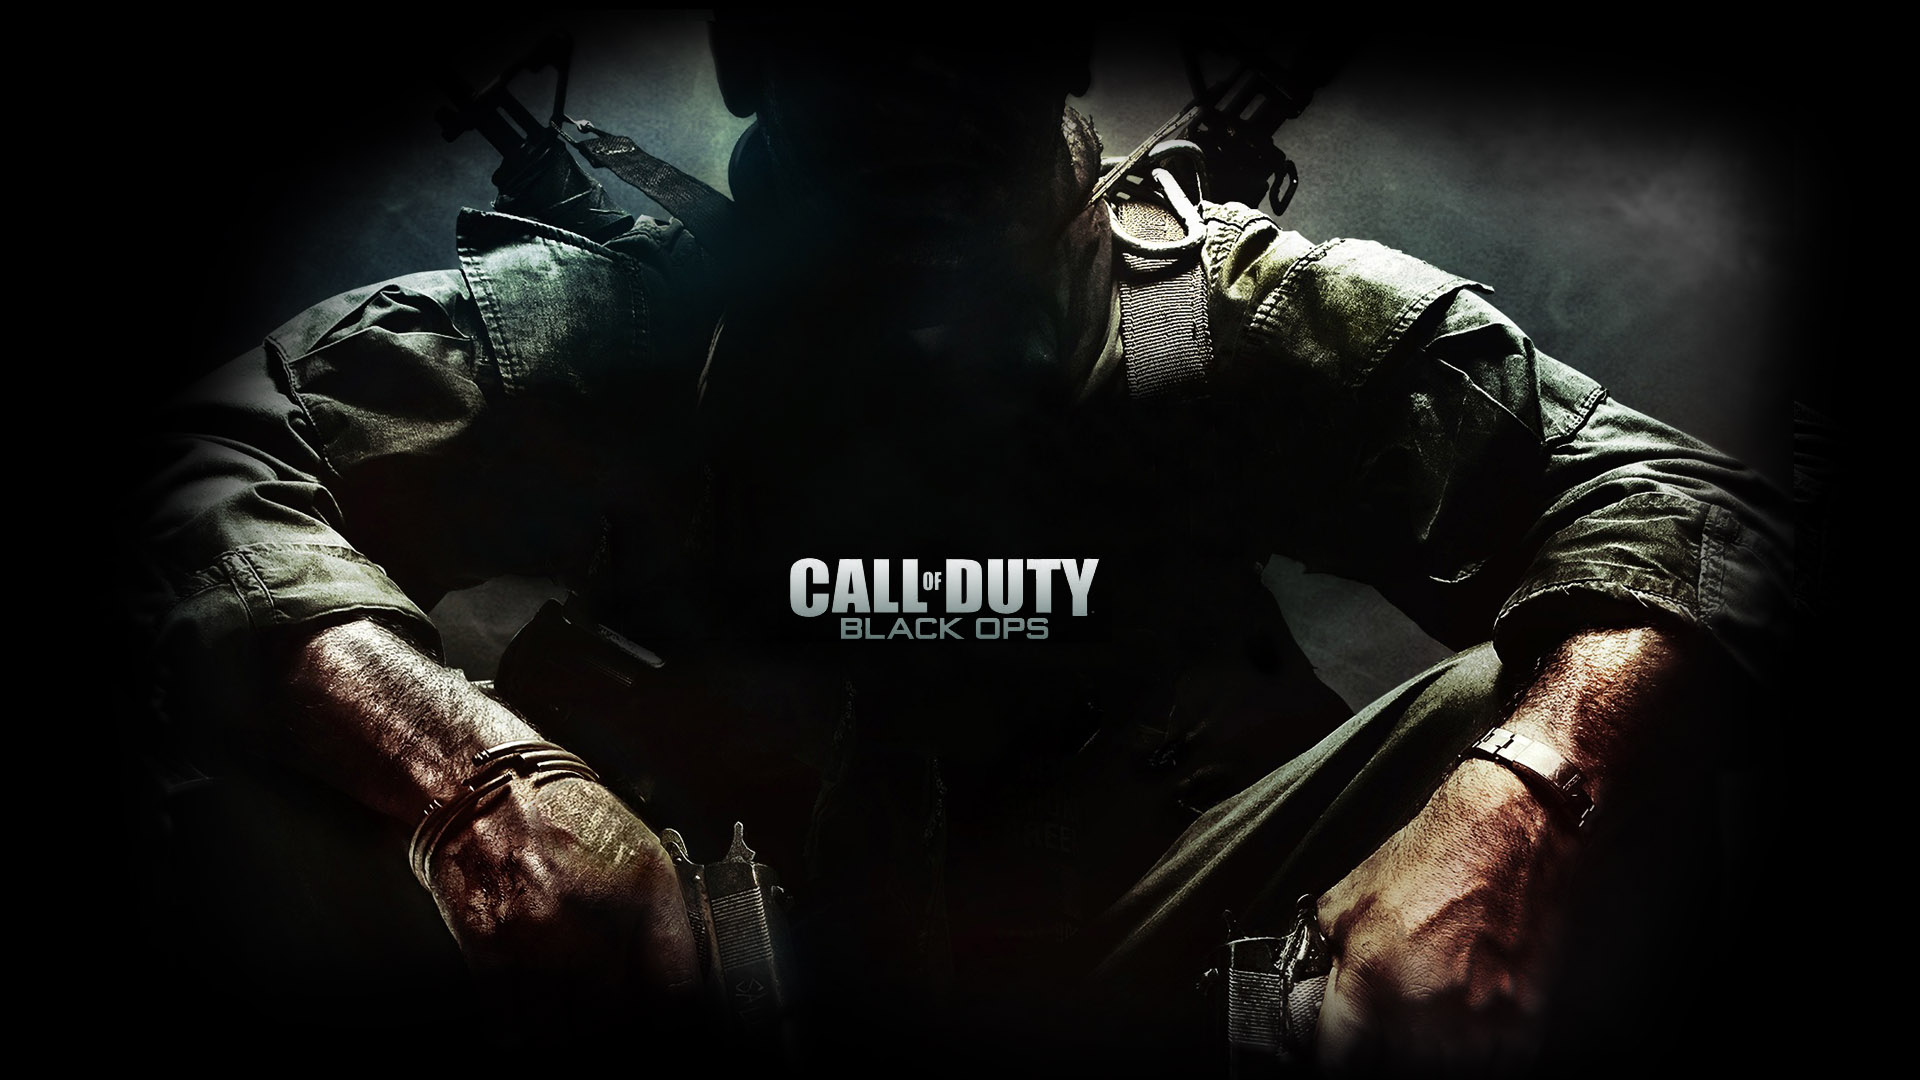  Call  Of Duty  Black  Ops Call  Of Duty  Wallpapers  HD 